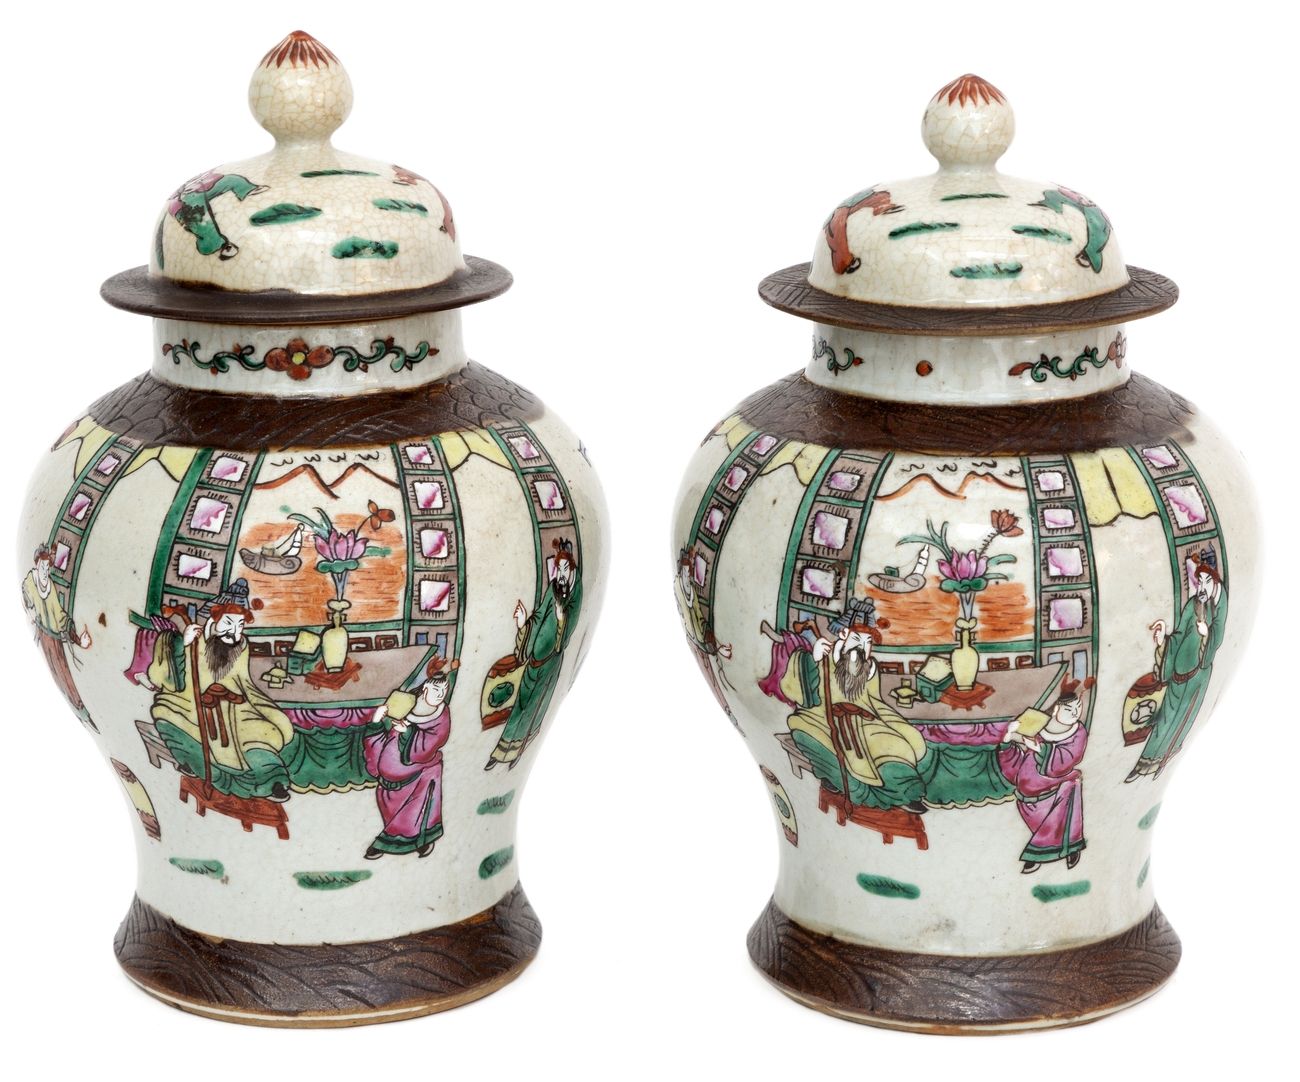 Null China, 19th century
A pair of covered Nanking cracked porcelain vases decor&hellip;